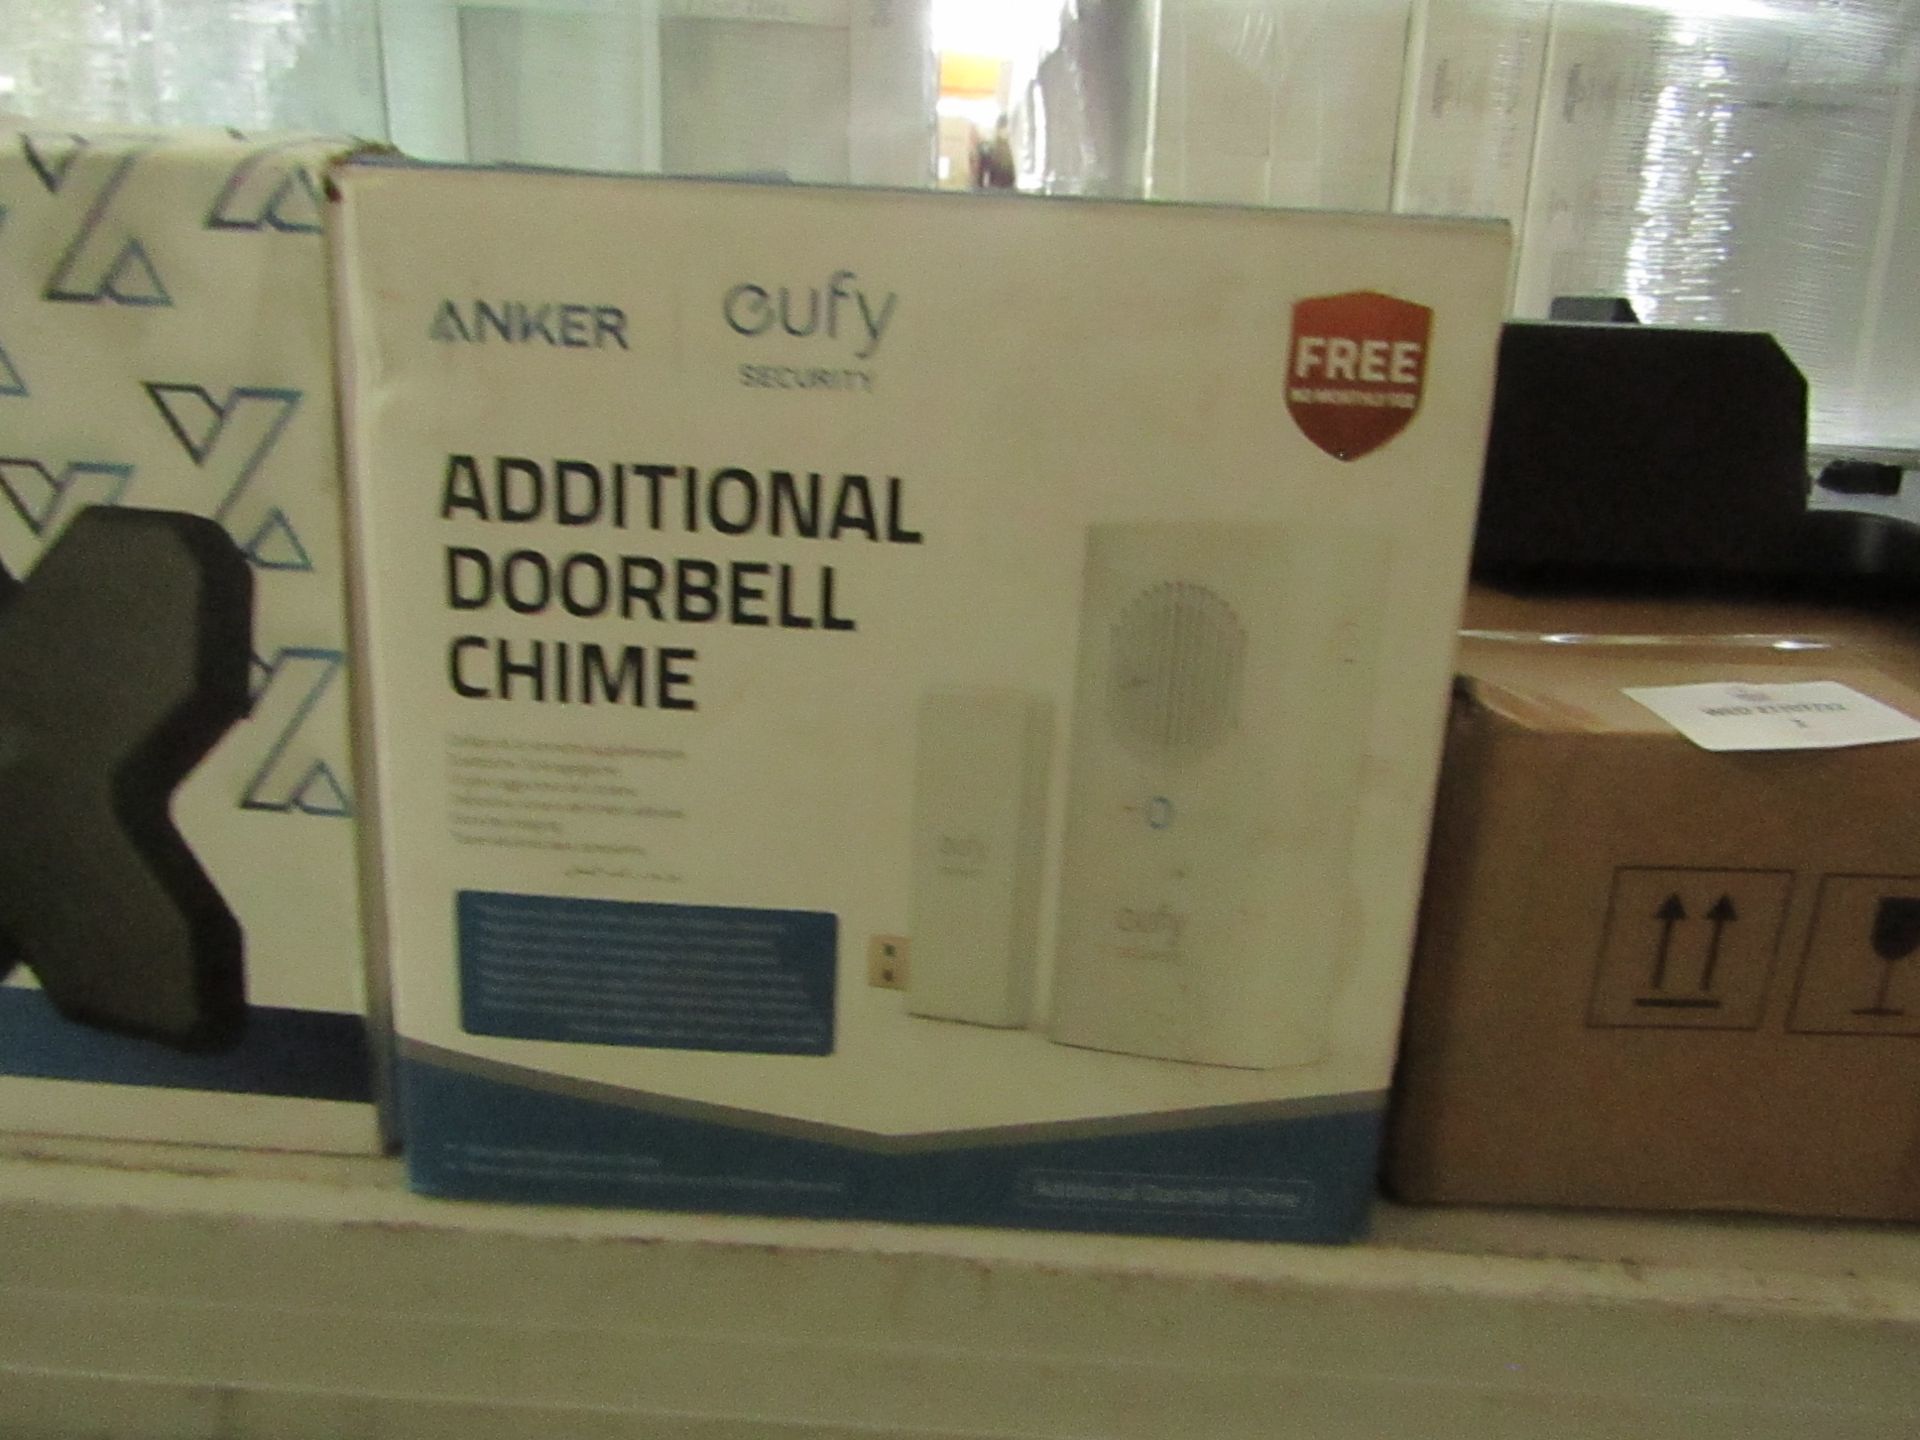 Anker - Eufy Security Additional Doorbell Chime - Untested & Boxed. RRP £12